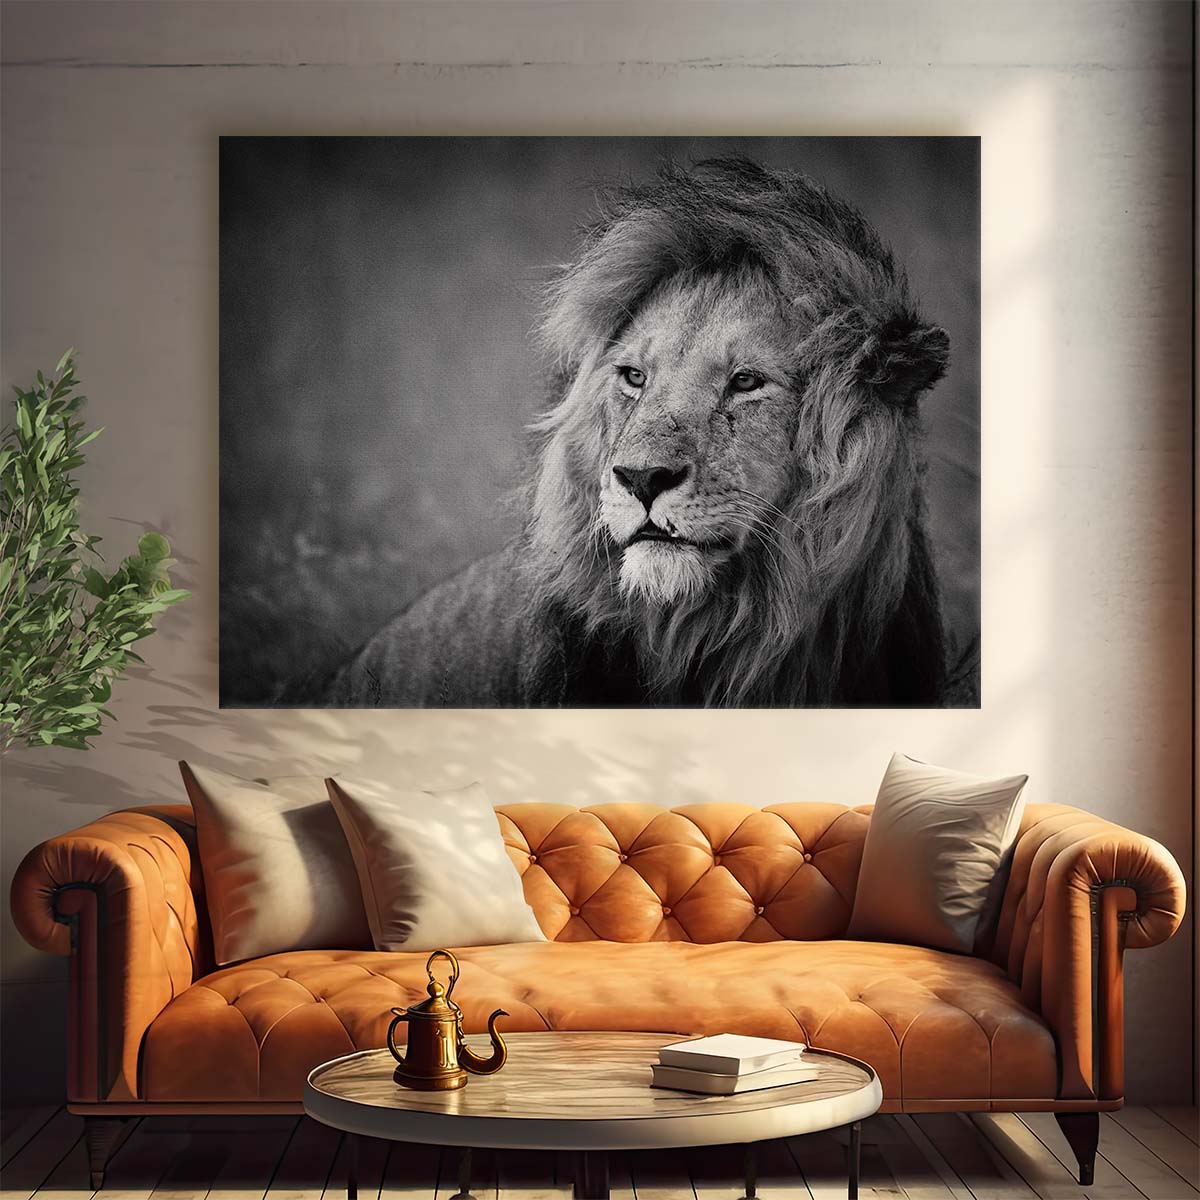 Majestic WindSwept Lion Monochrome Wall Art by Luxuriance Designs. Made in USA.